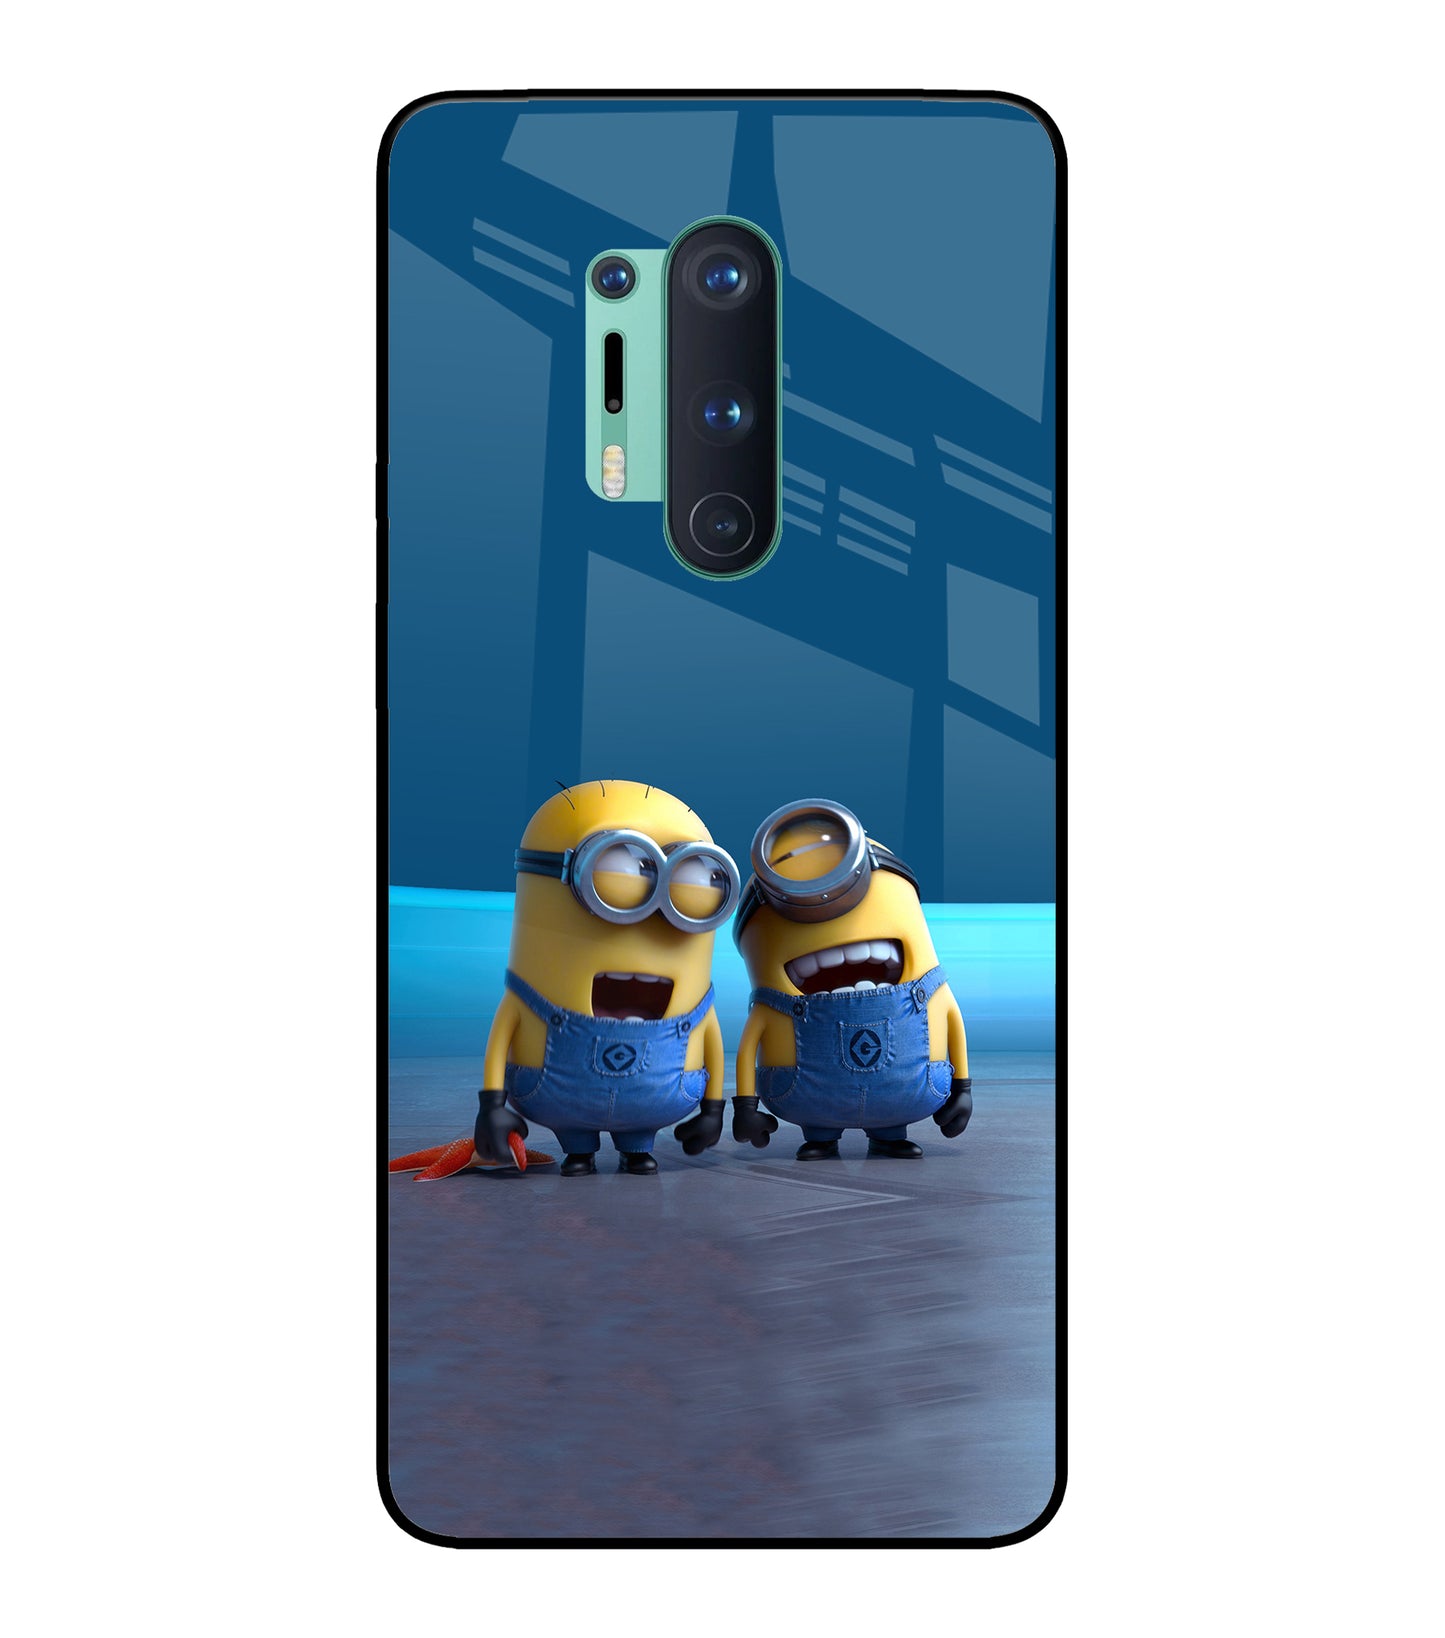 Minion Laughing Oneplus 8 Pro Glass Cover